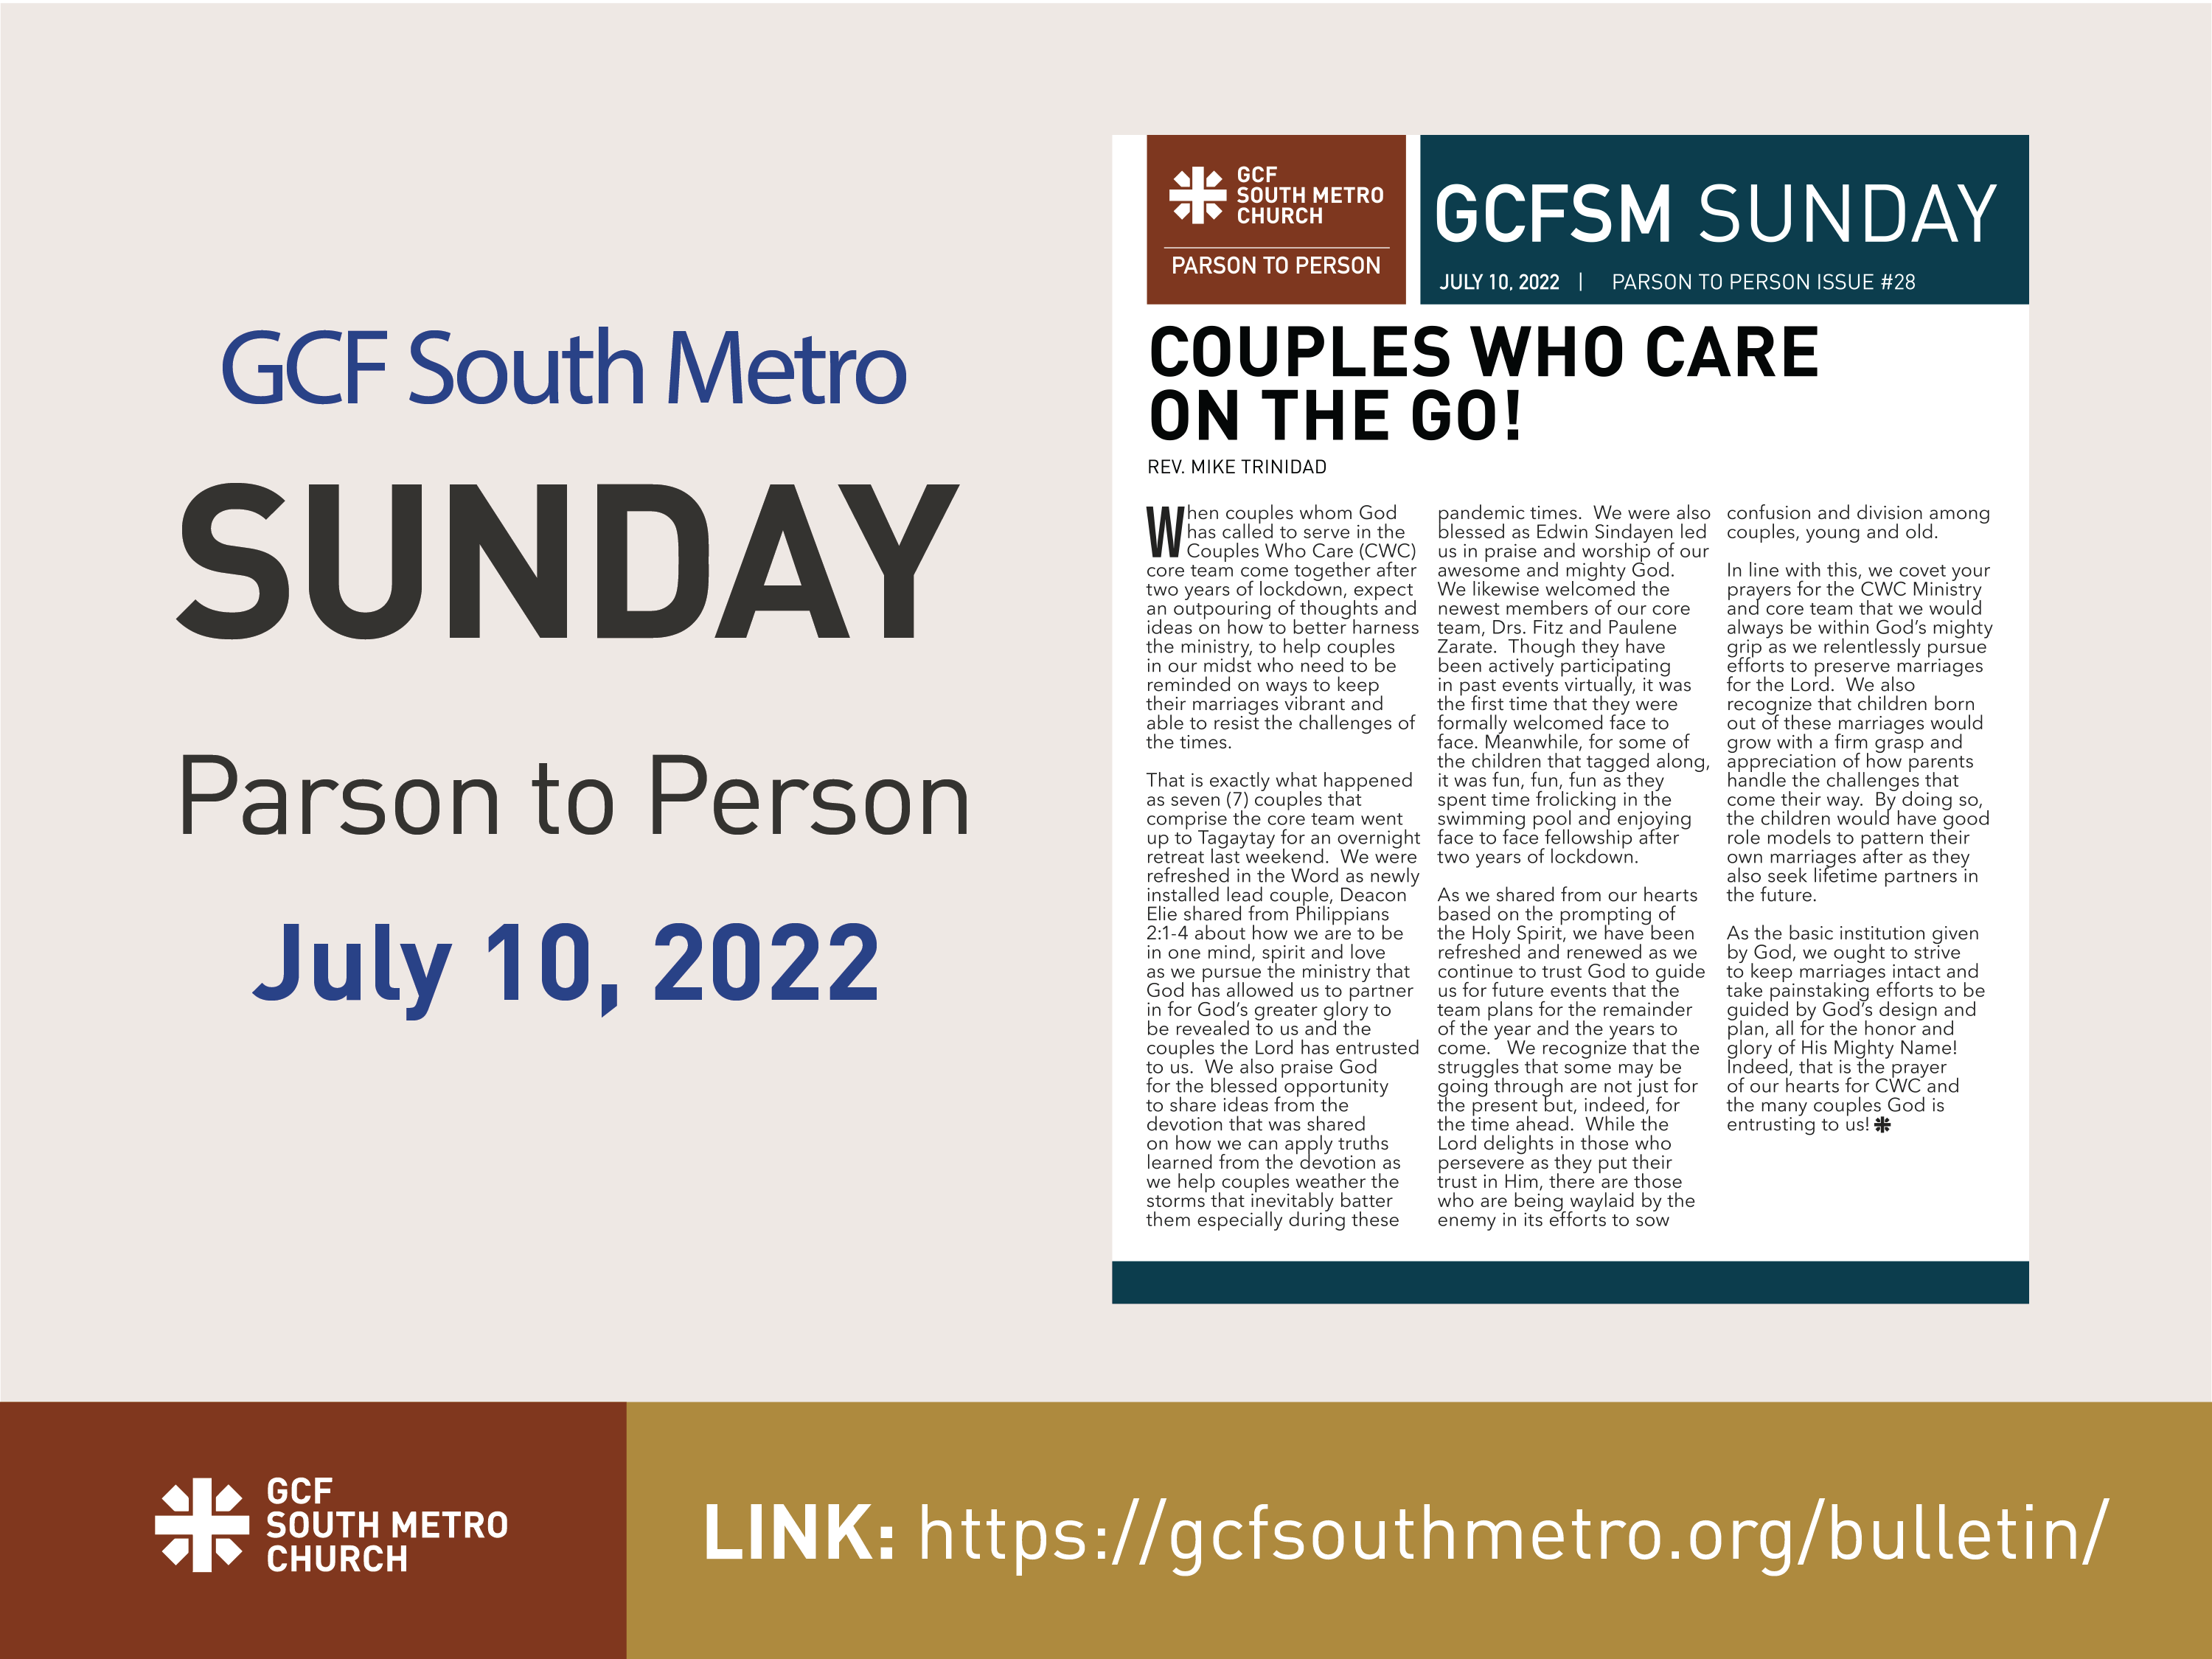 Sunday Bulletin – Parson to Person, July 10, 2022